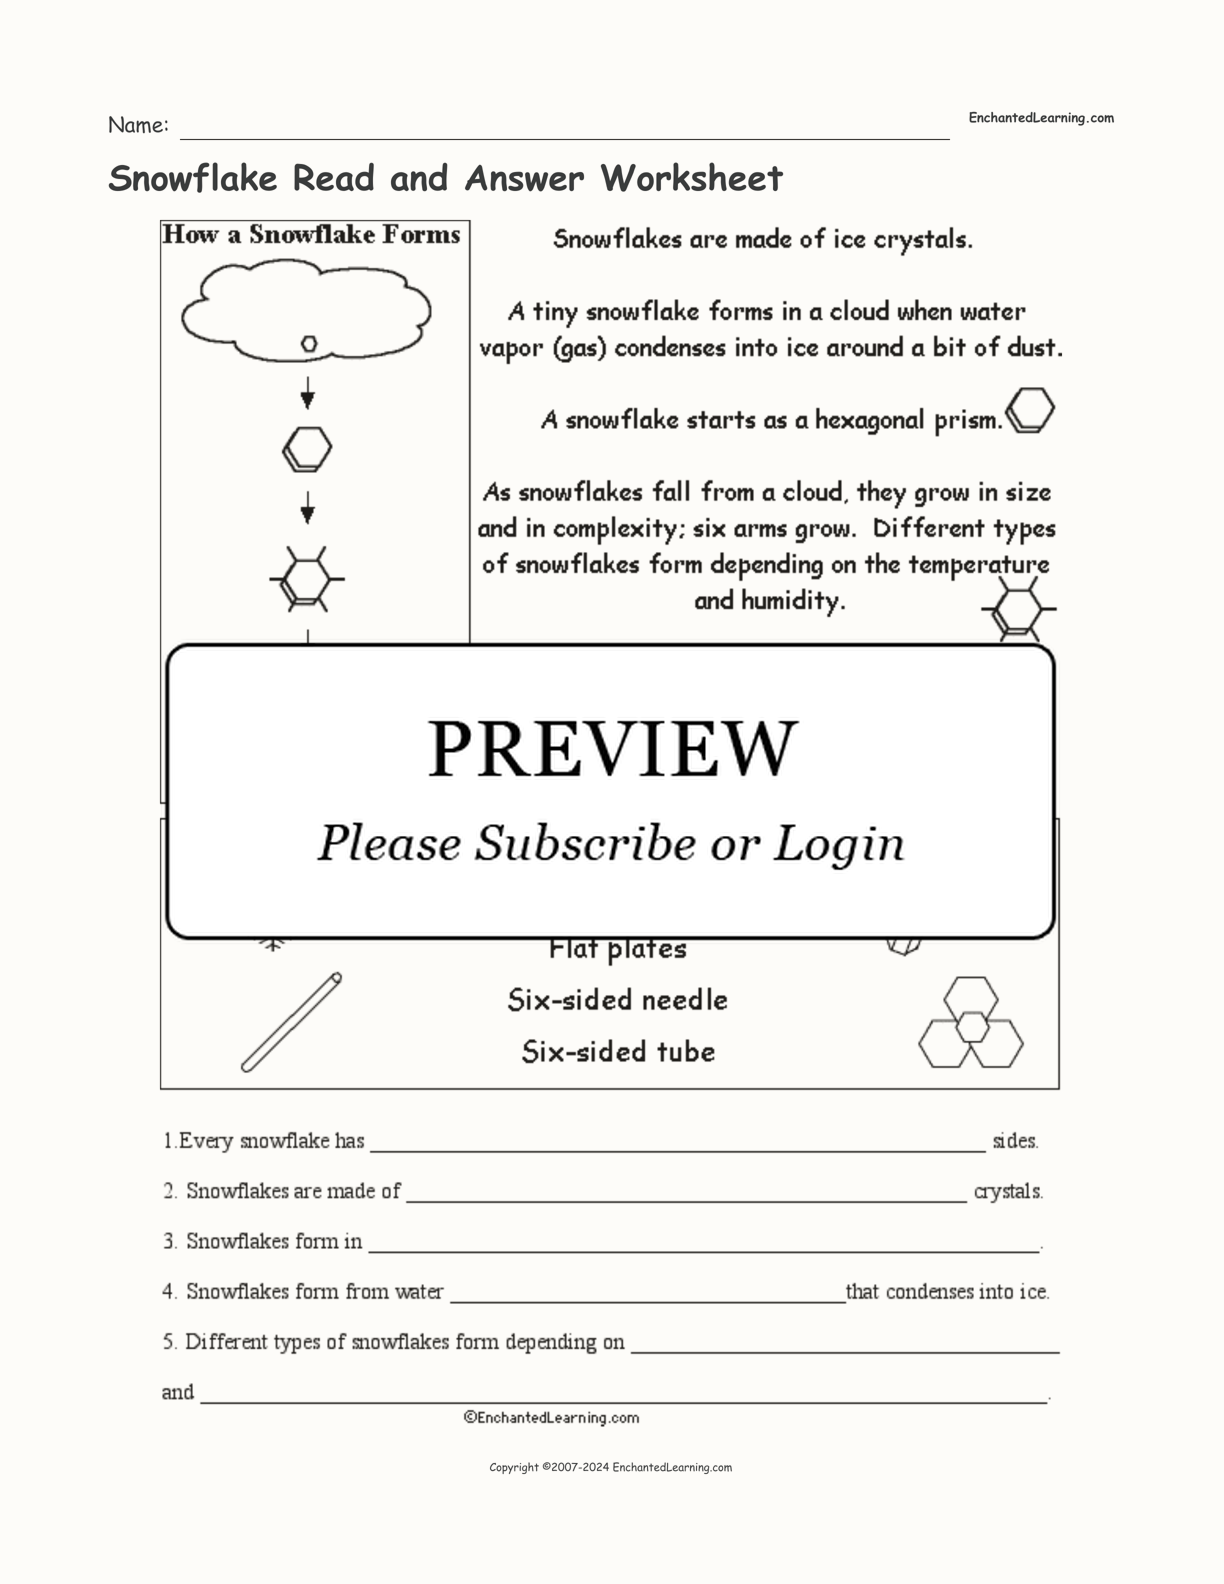 Snowflake Read and Answer Worksheet interactive worksheet page 1